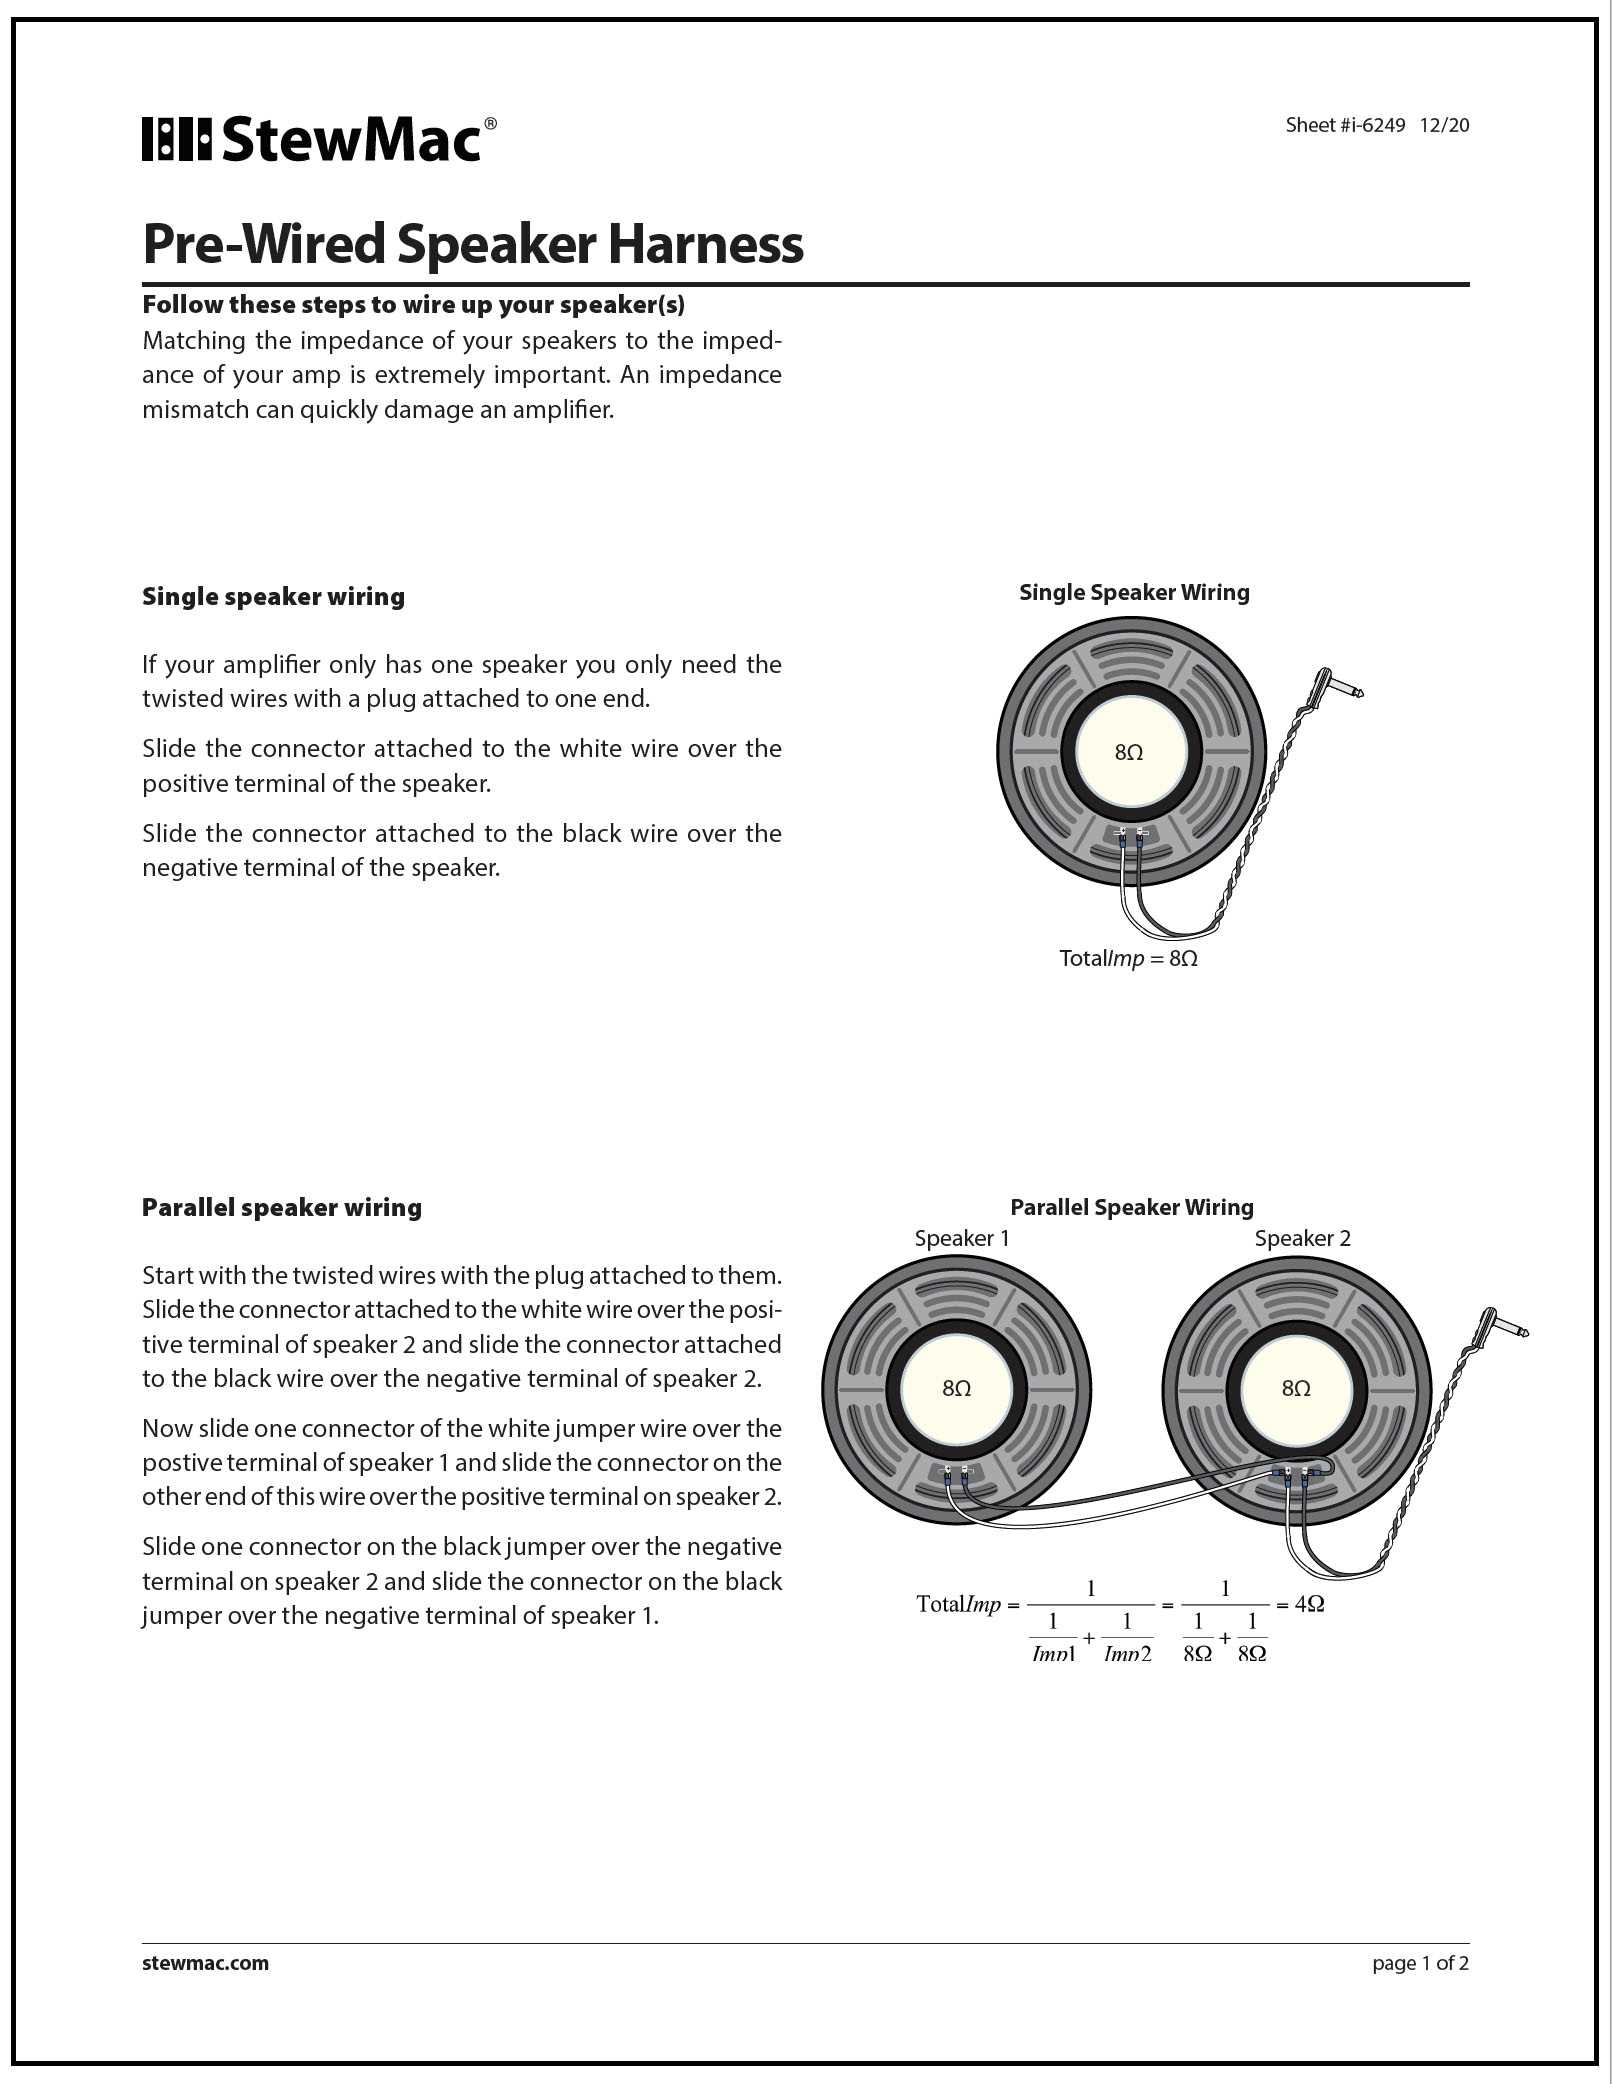 Pre-Wired Speaker Harness Instructions